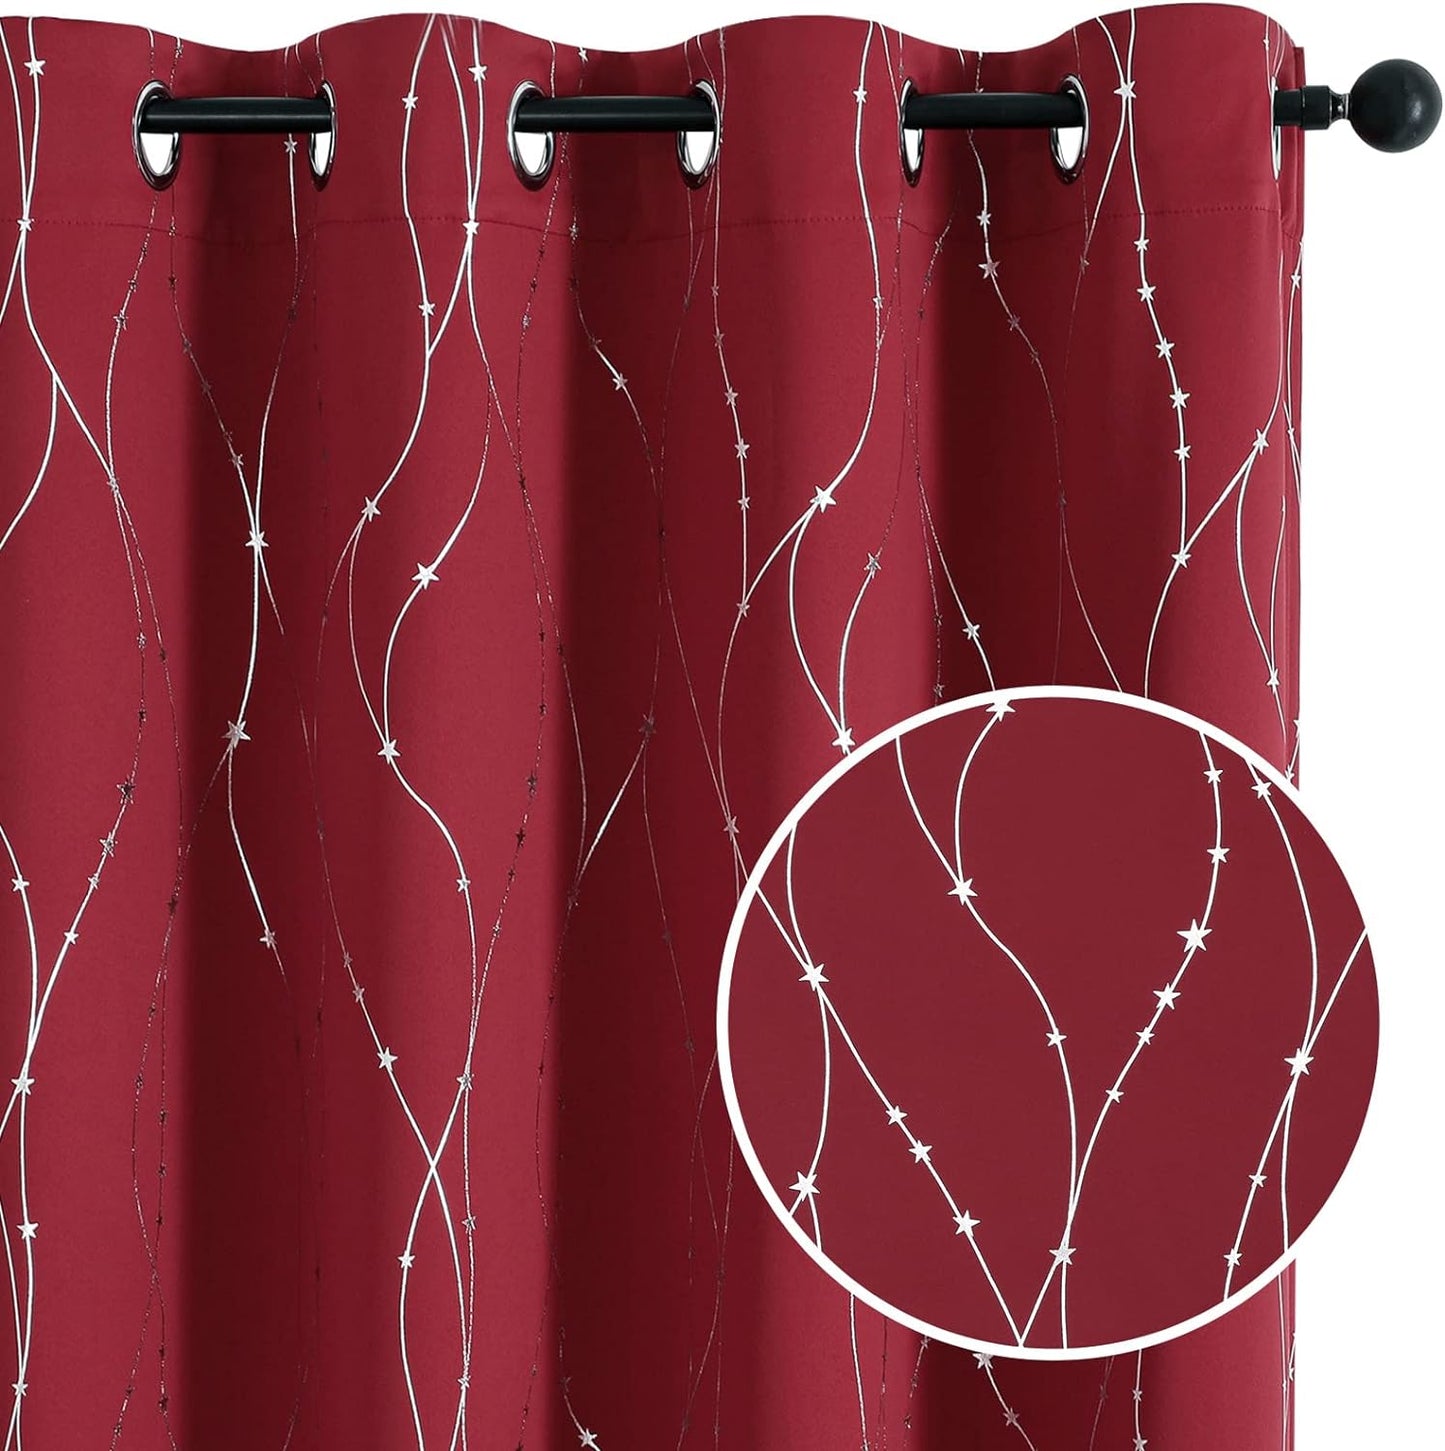 SMILE WEAVER Black Blackout Curtains for Bedroom 72 Inch Long 2 Panels,Room Darkening Curtain with Gold Print Design Noise Reducing Thermal Insulated Window Treatment Drapes for Living Room  SMILE WEAVER Red Silver 52Wx84L 